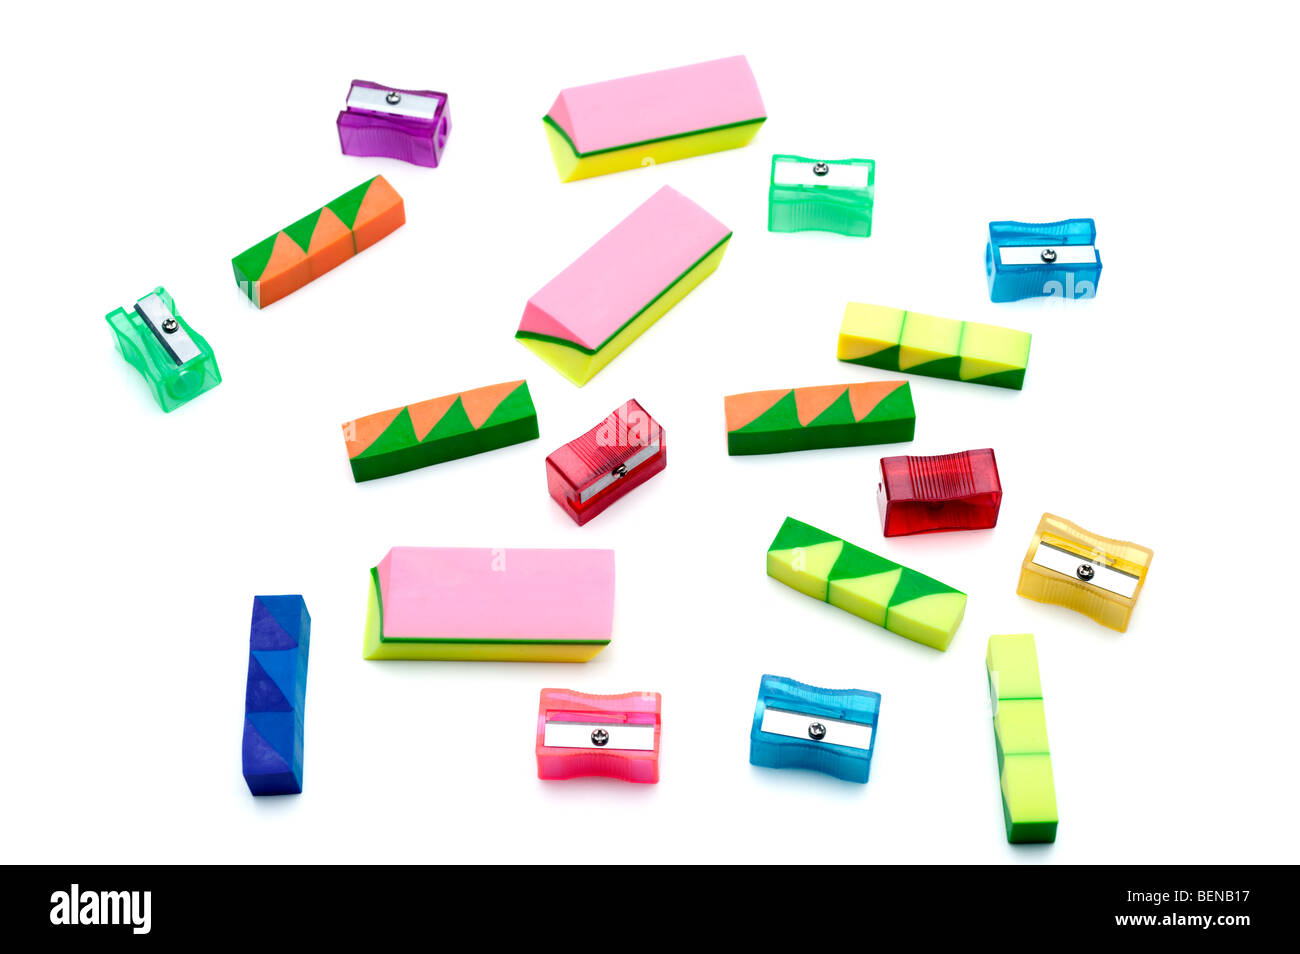 multi coloured colored rubbers and pencil sharpeners Stock Photo